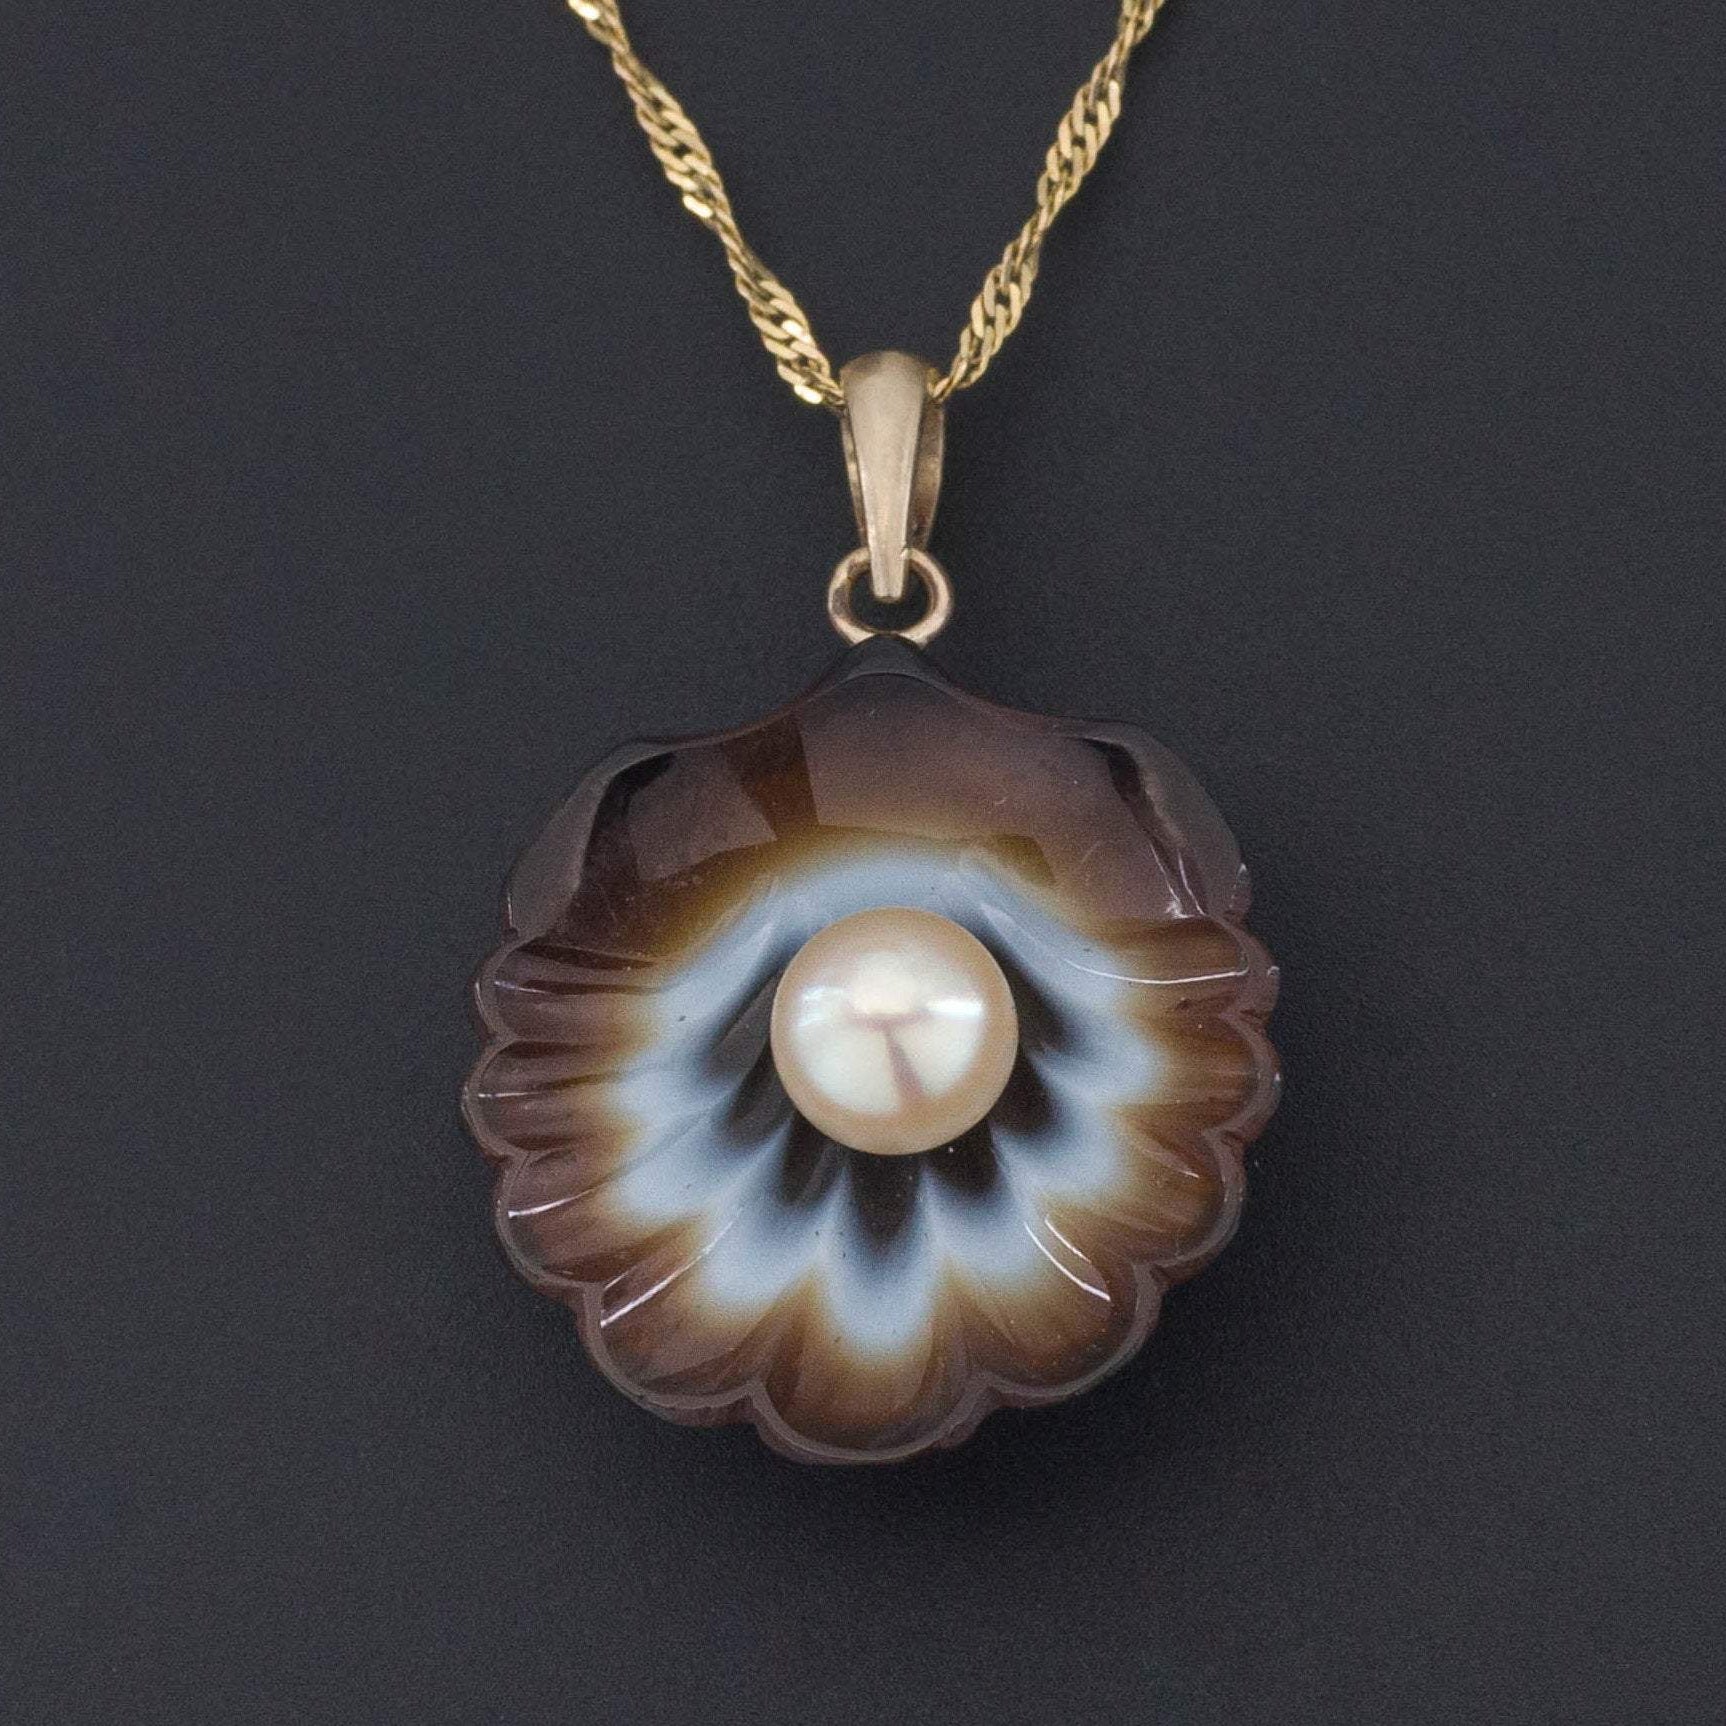 Banded Agate Shell Pendant | Antique Banded Agate Shell Pendant | Antique Pin Conversion Necklace | 14k Pendant on Optional 10k Chain